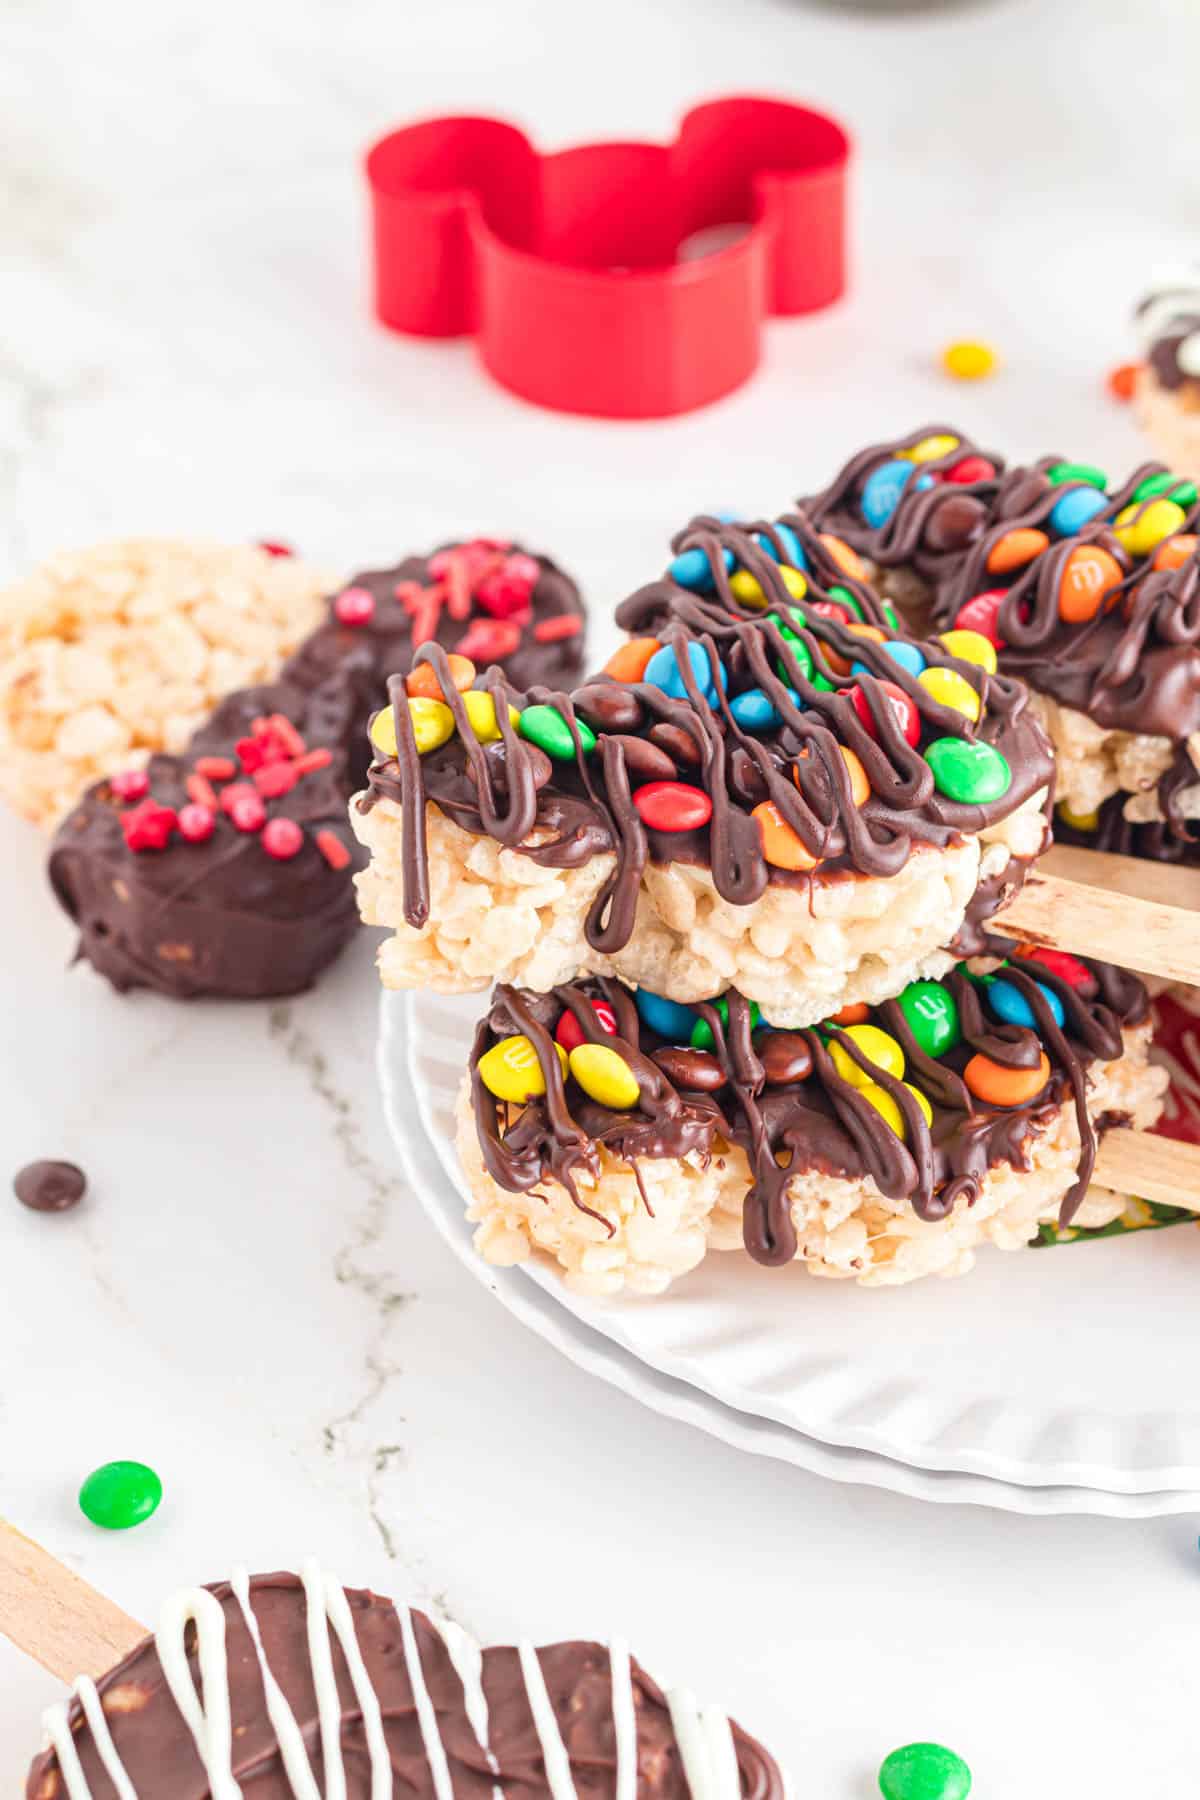 Mickey Mouse rice krispie treats with mini M&M's on top.